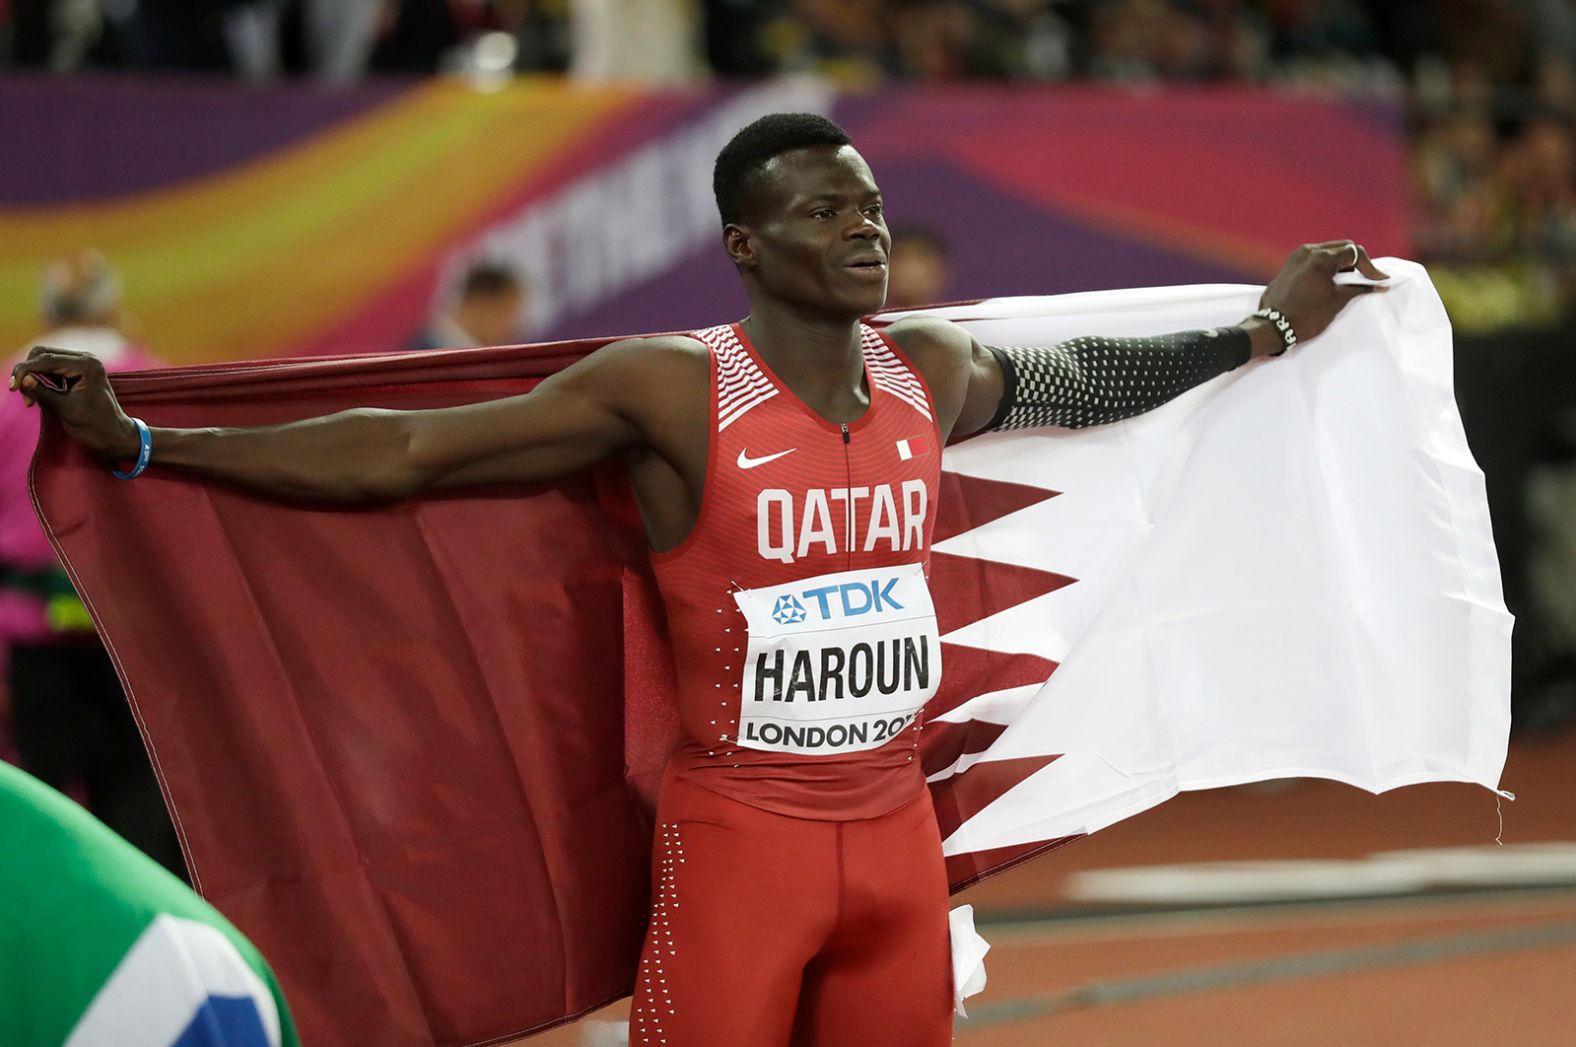 Qatari sprinter <a href="https://www.cnn.com/2021/06/26/sport/abdalelah-haroun-qatar-sprinter-death-spt-intl/index.html" target="_blank">Abdalelah Haroun,</a> who won bronze in the 400 meters at the 2017 World Championships, died June 26 at the age of 24. The Qatar Olympic Committee, which announced Haroun's death on social media, did not say how he died.